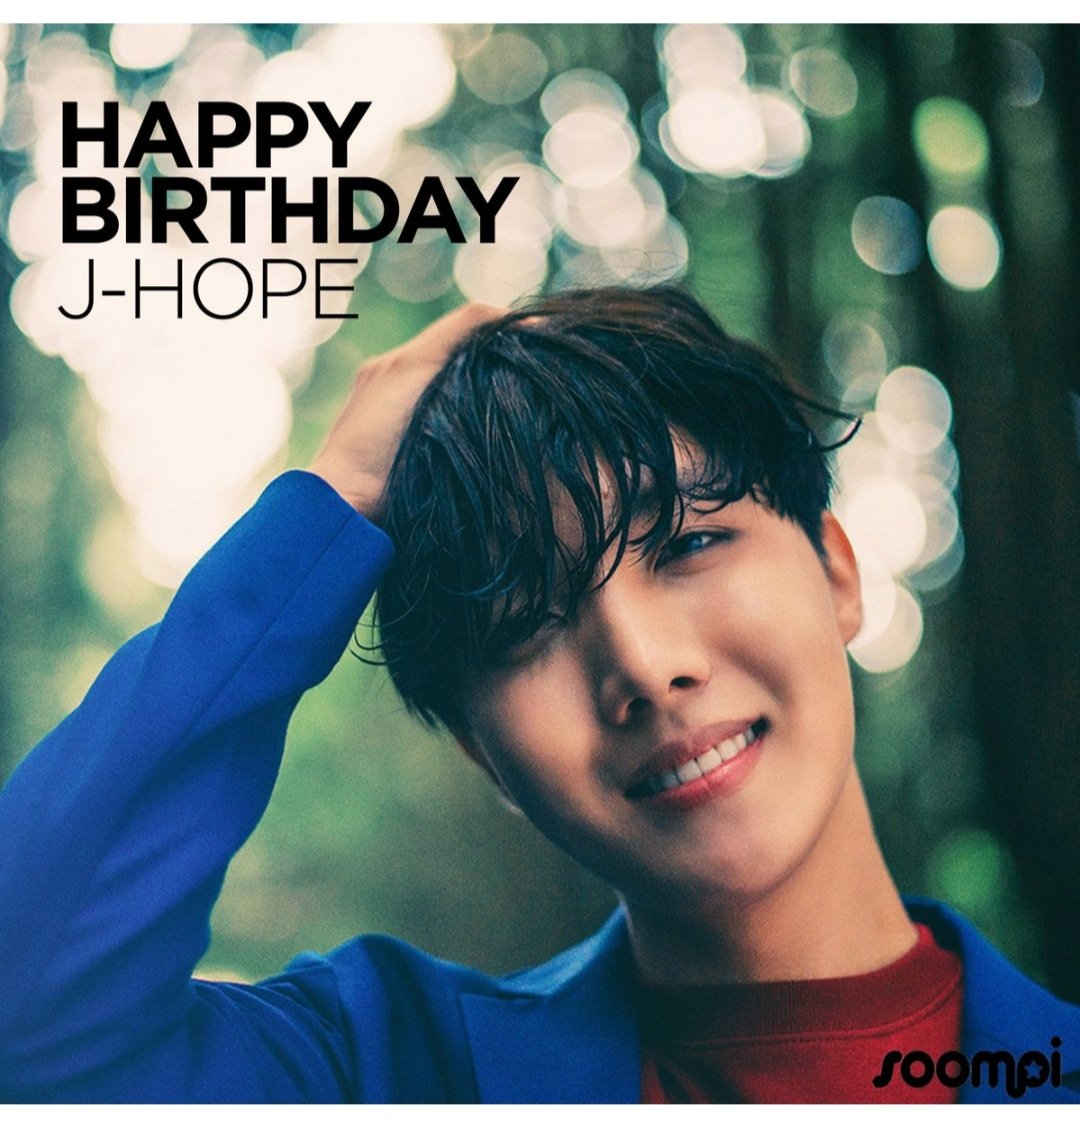 @BTSb_JHS Once again happy birthday to you dear Jhope 💜💜💜
God bless you 🎂🎂☺️☺️